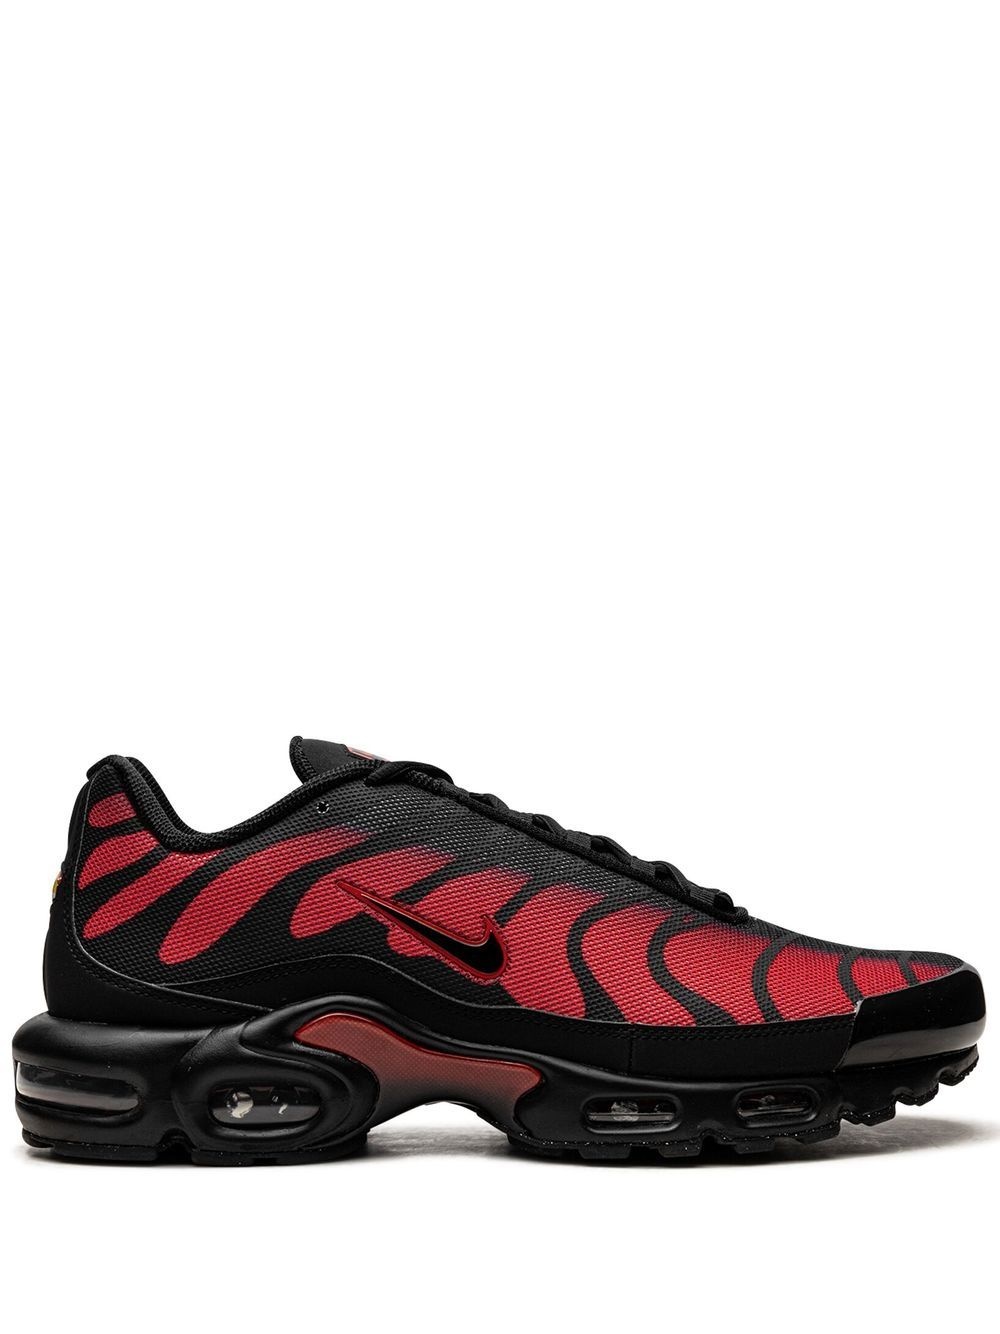 Air Max Plus "Bred Reflective" sneakers - 1